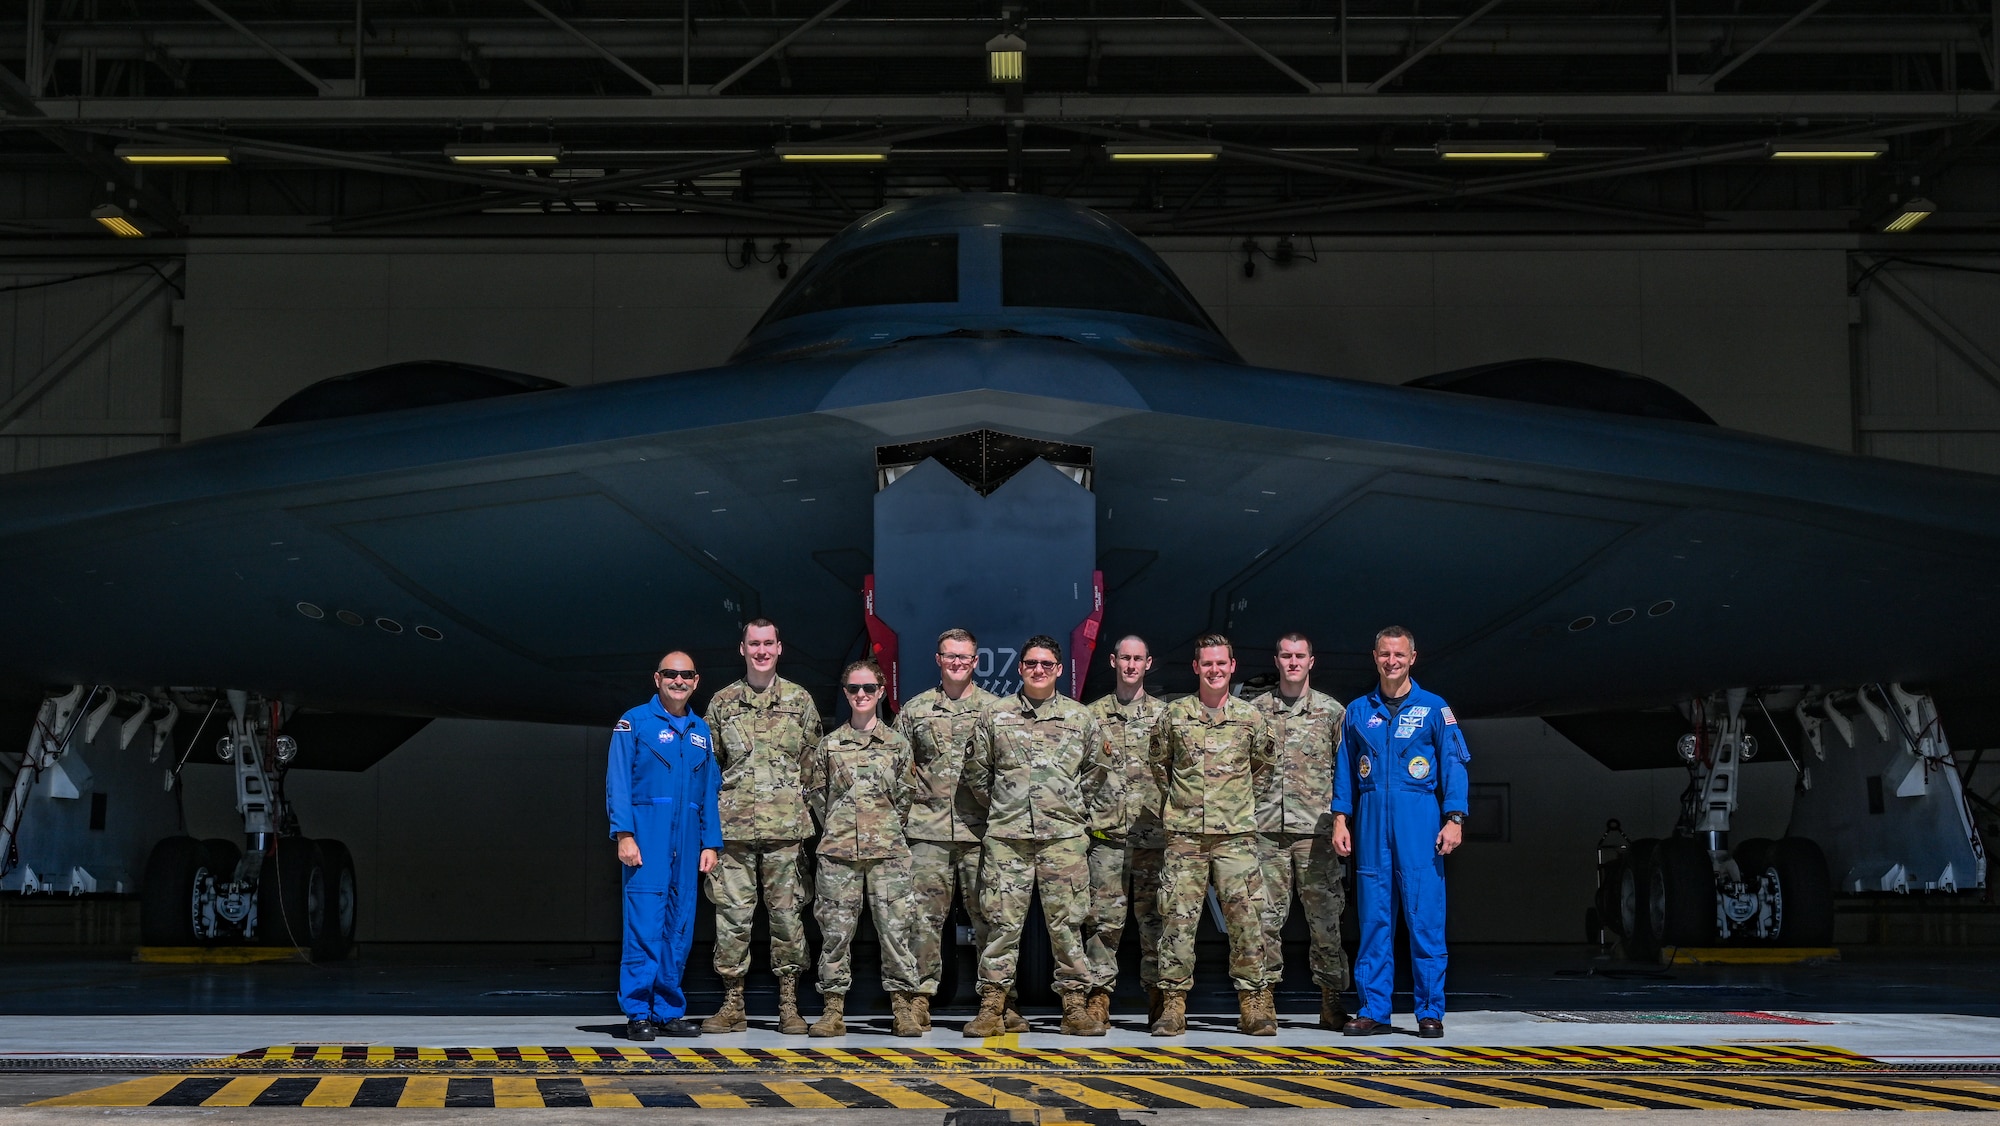 U.S. Air Force Airmen and NASA personnel pose in front of a U.S. Air Force B-2 Spirit stealth bomber at Whiteman Air Force Base, Missouri, June 7, 2022. NASA and the 509th Bomb Wing engaged in cross-organizational communication, discussing common mission components between the two organizations. Finding new ways to enhance current partnerships ensures innovation and growth, allowing men and women of the 509th BW to maintain the most lethal combat force in the world.